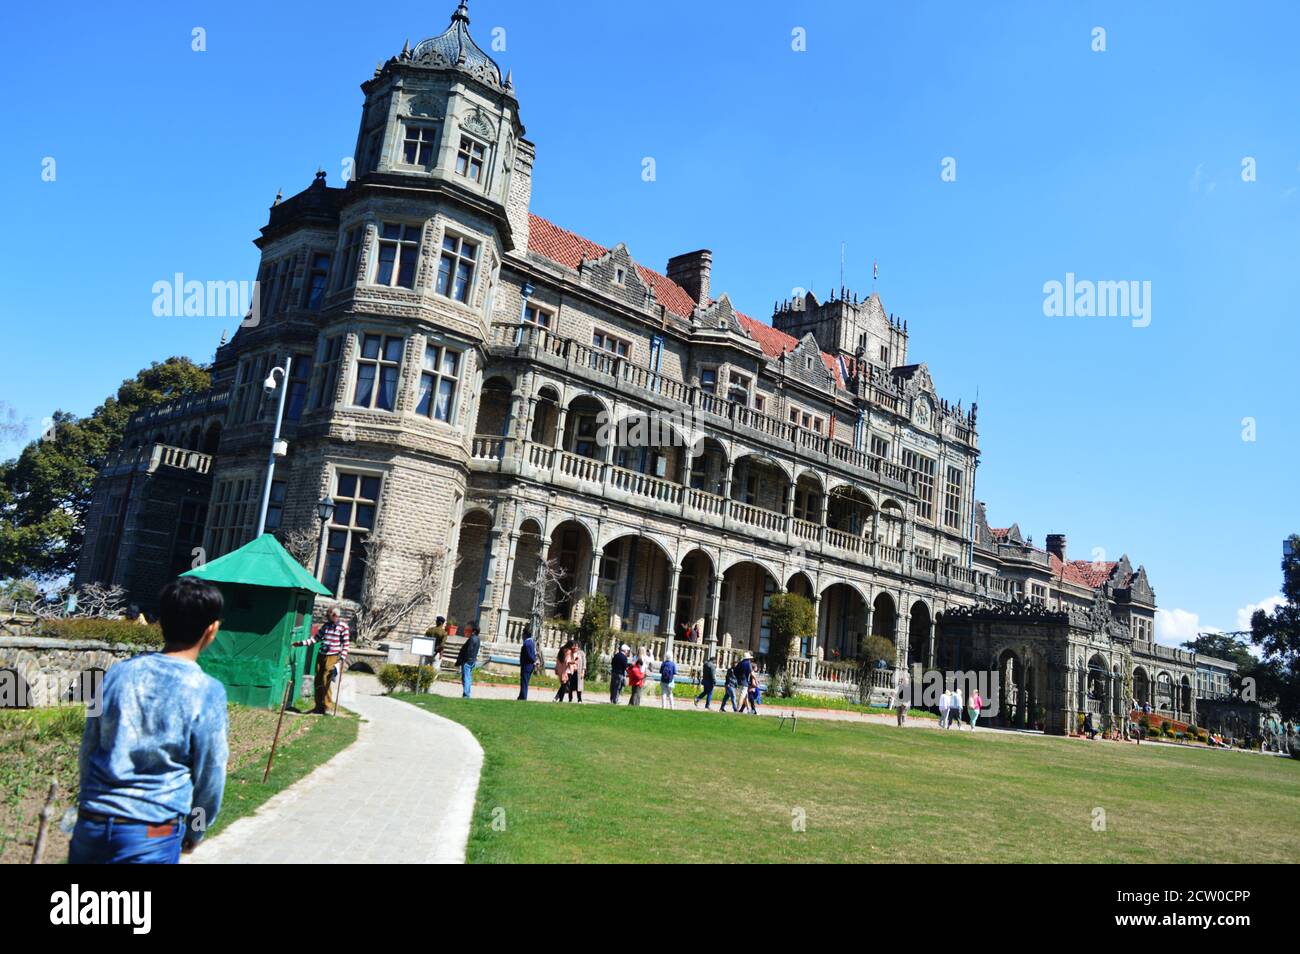 The Institute of Advance Studies in Shimla, also known as Viceregal Lodge, house of Lord Dufferin built in Indo – Gothic style architecture, selective Stock Photo